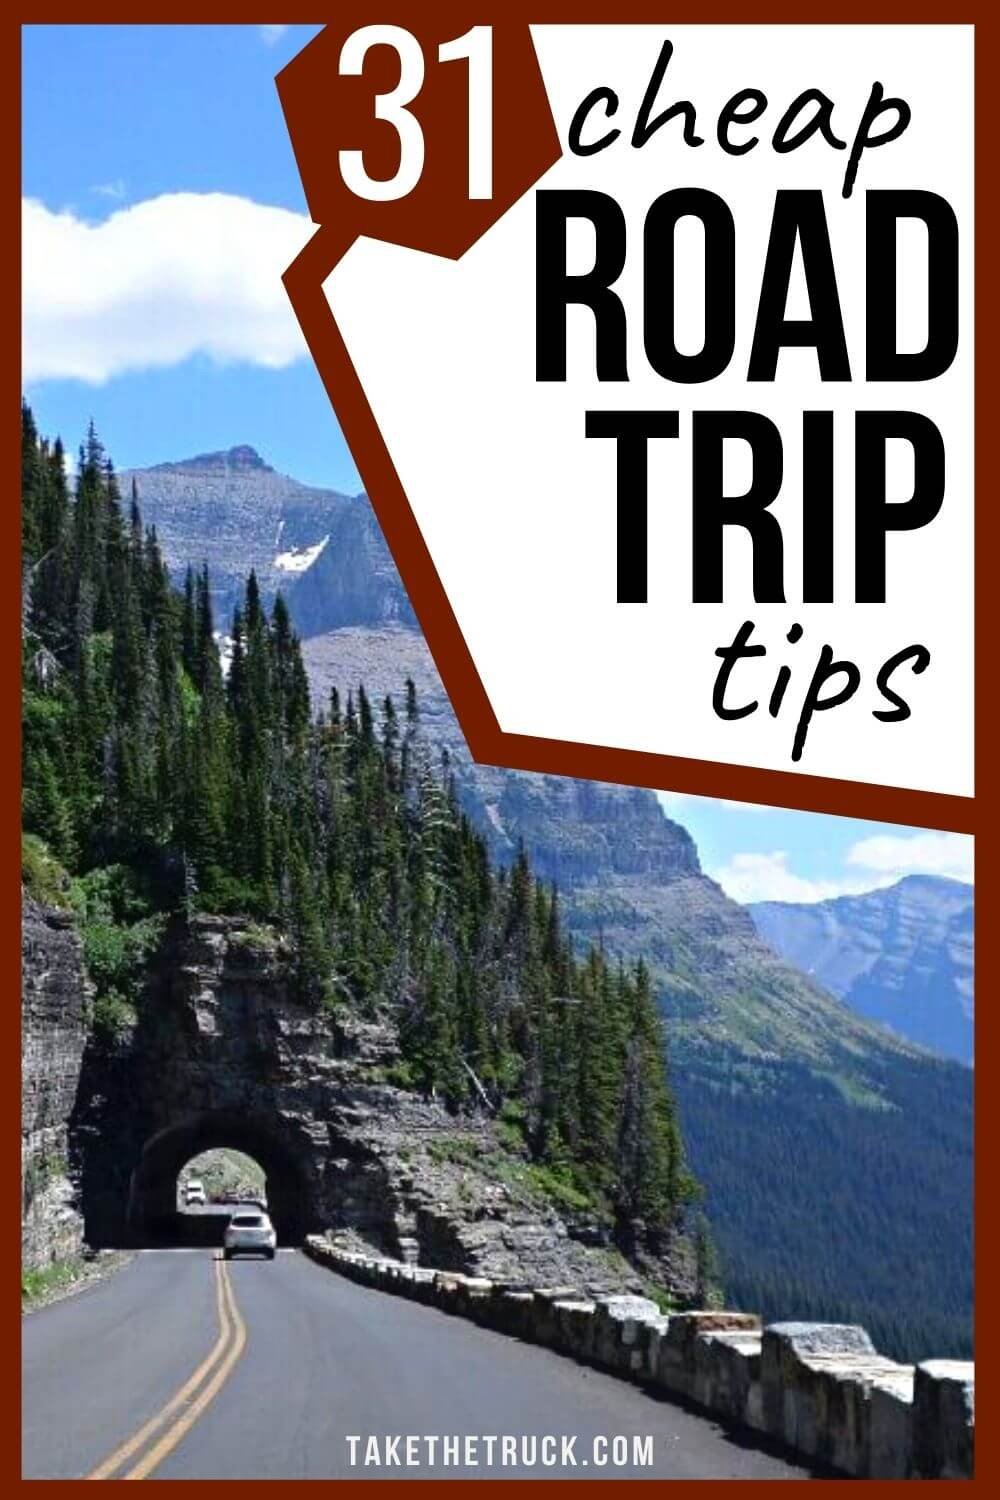 31 budget road trip travel hacks, from how to plan a road trip on a budget, to cheap road trip ideas, budget road trip food, budget road trip meals, how to road trip on a budget with kids, and more!